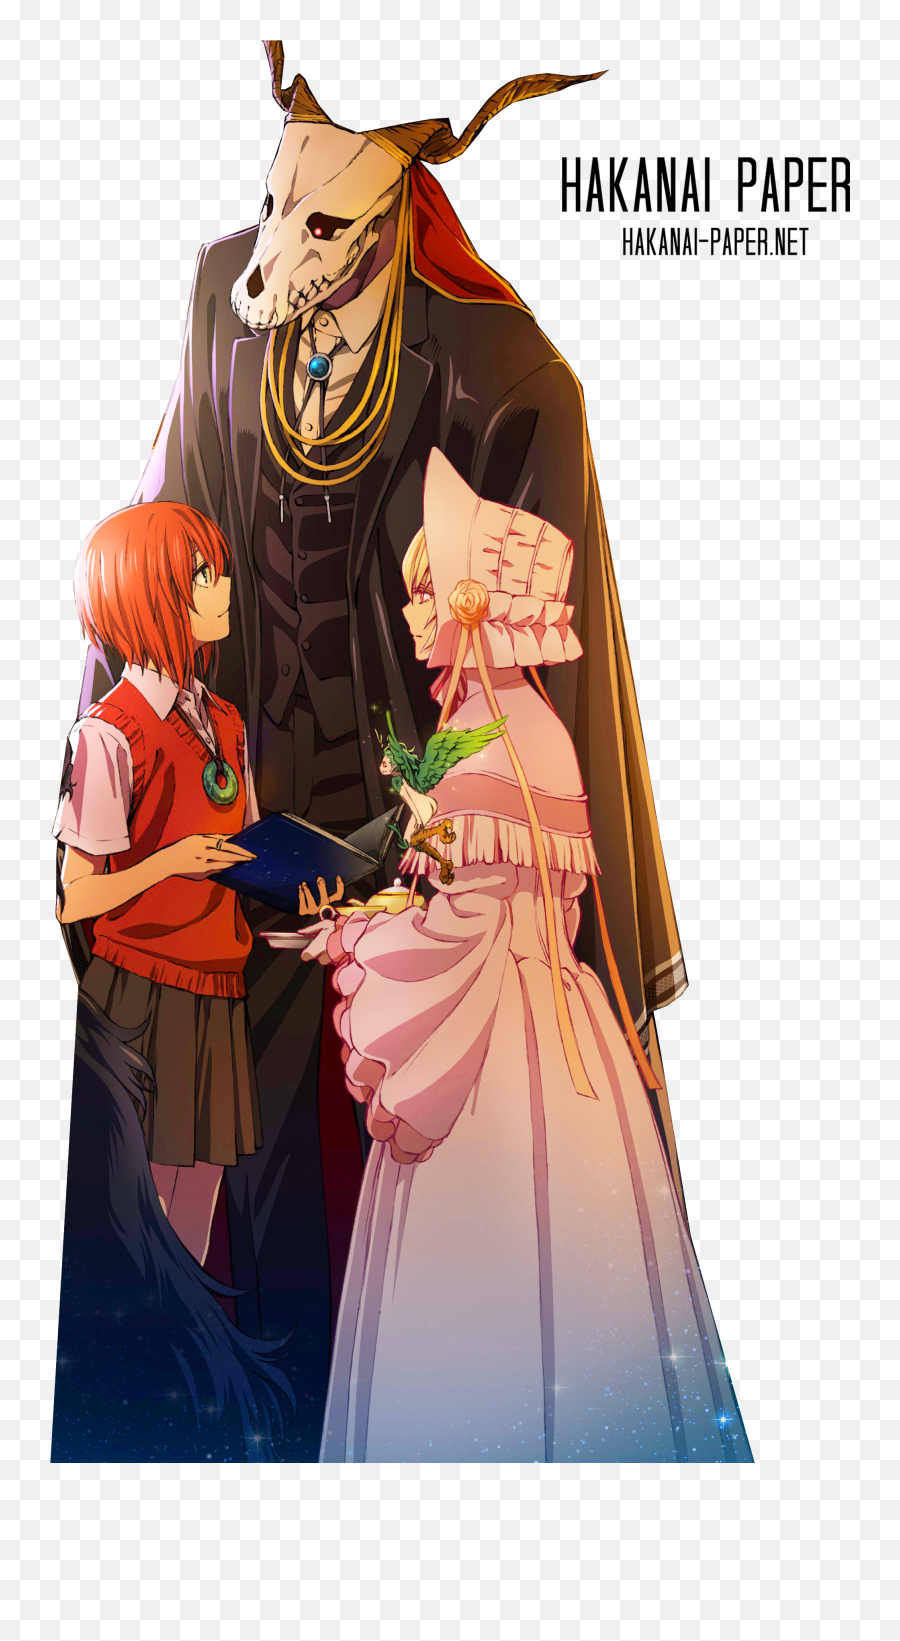 Download The Ancient Magus - Dvd The Ancient Magus Bride Hd Dvd The Ancient Magus Bride Emoji,Bride Emoji Png